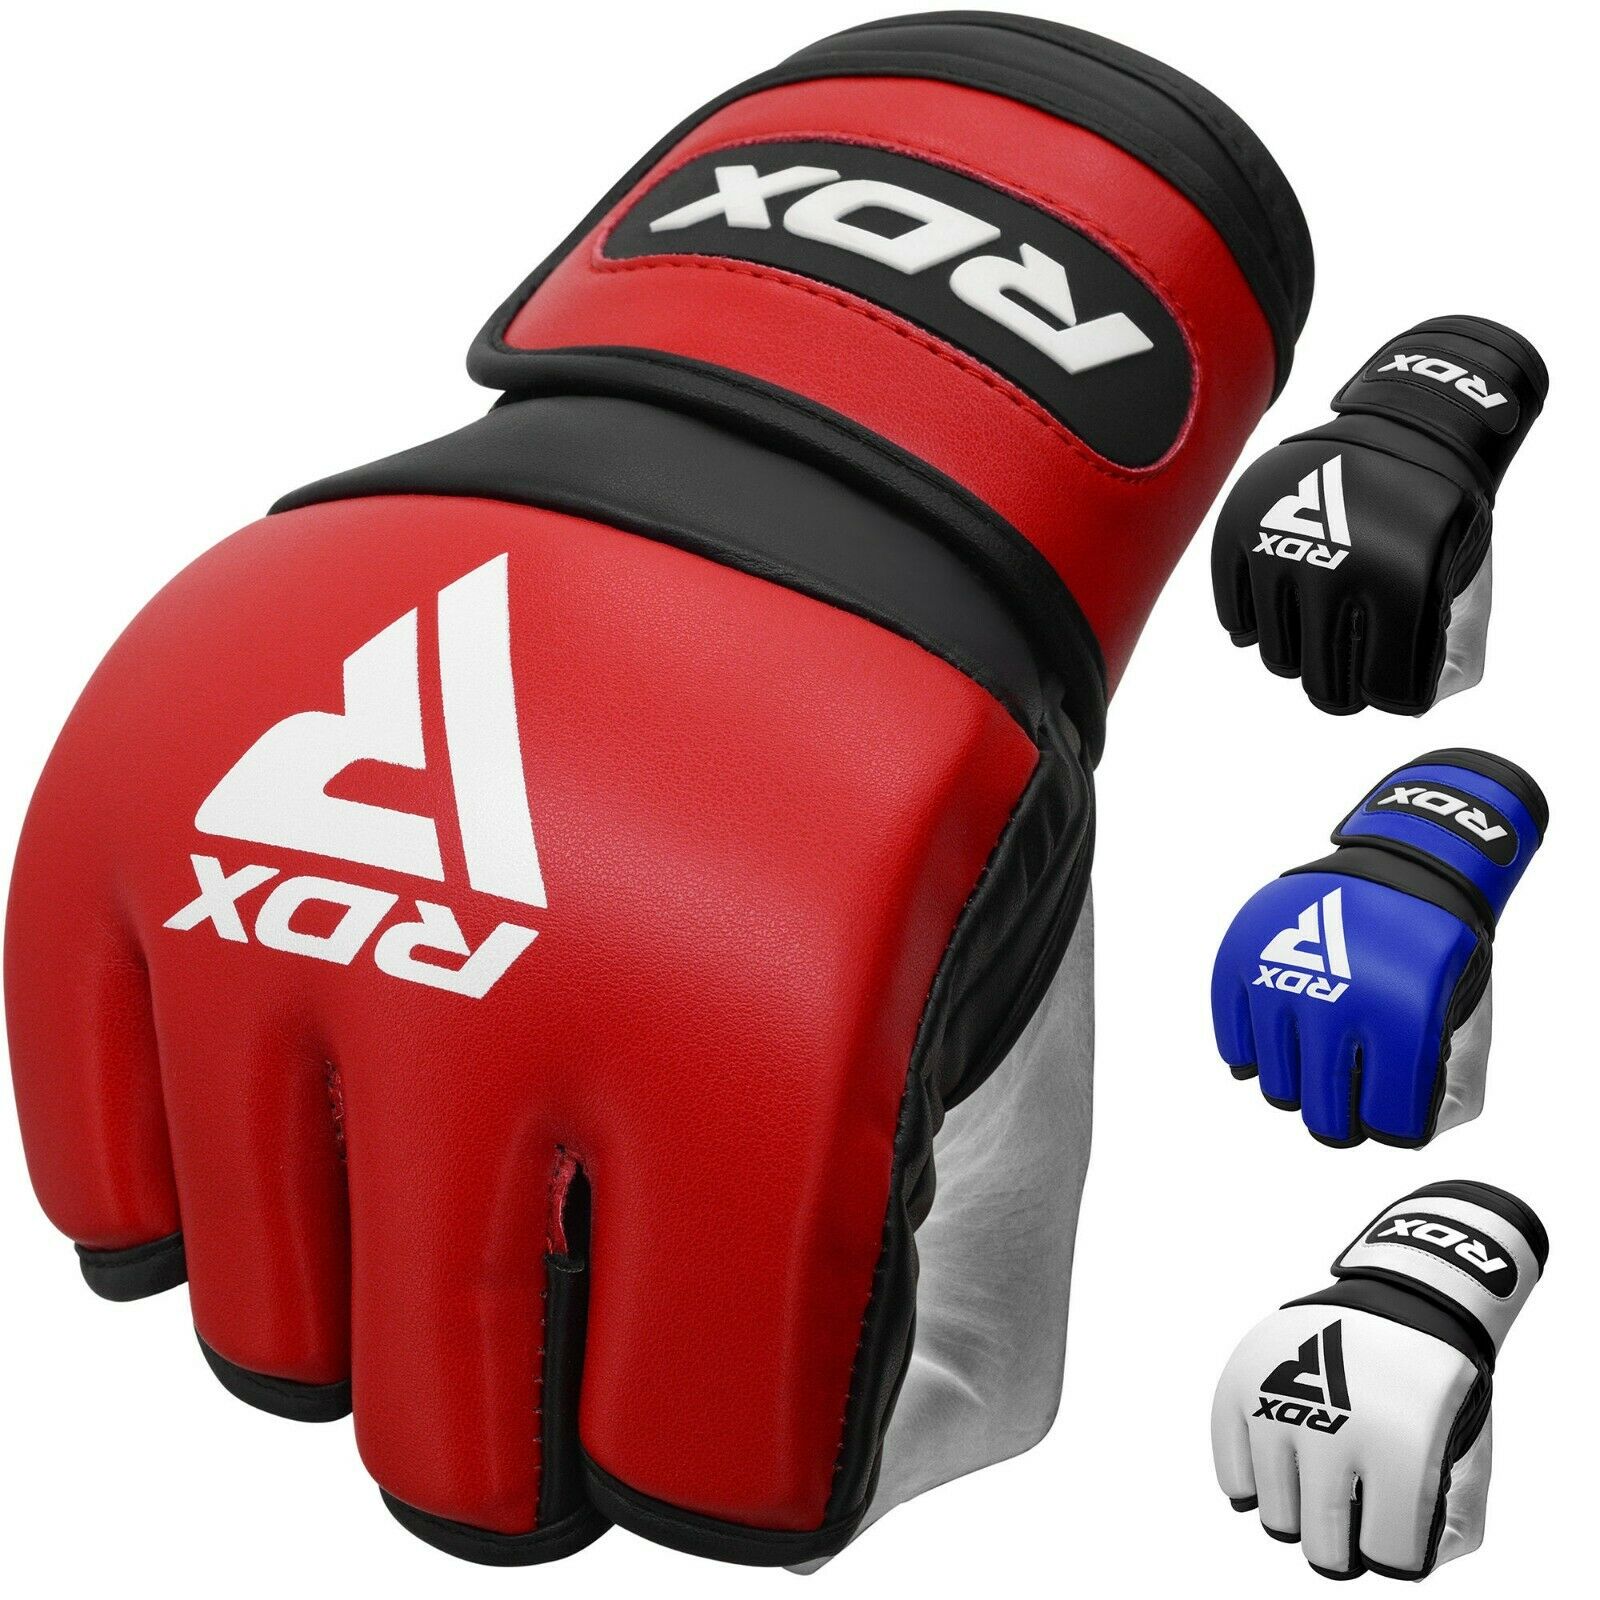 RDX MMA Gloves Martial Arts Combat Punch Training Sparring Fighting Grappling